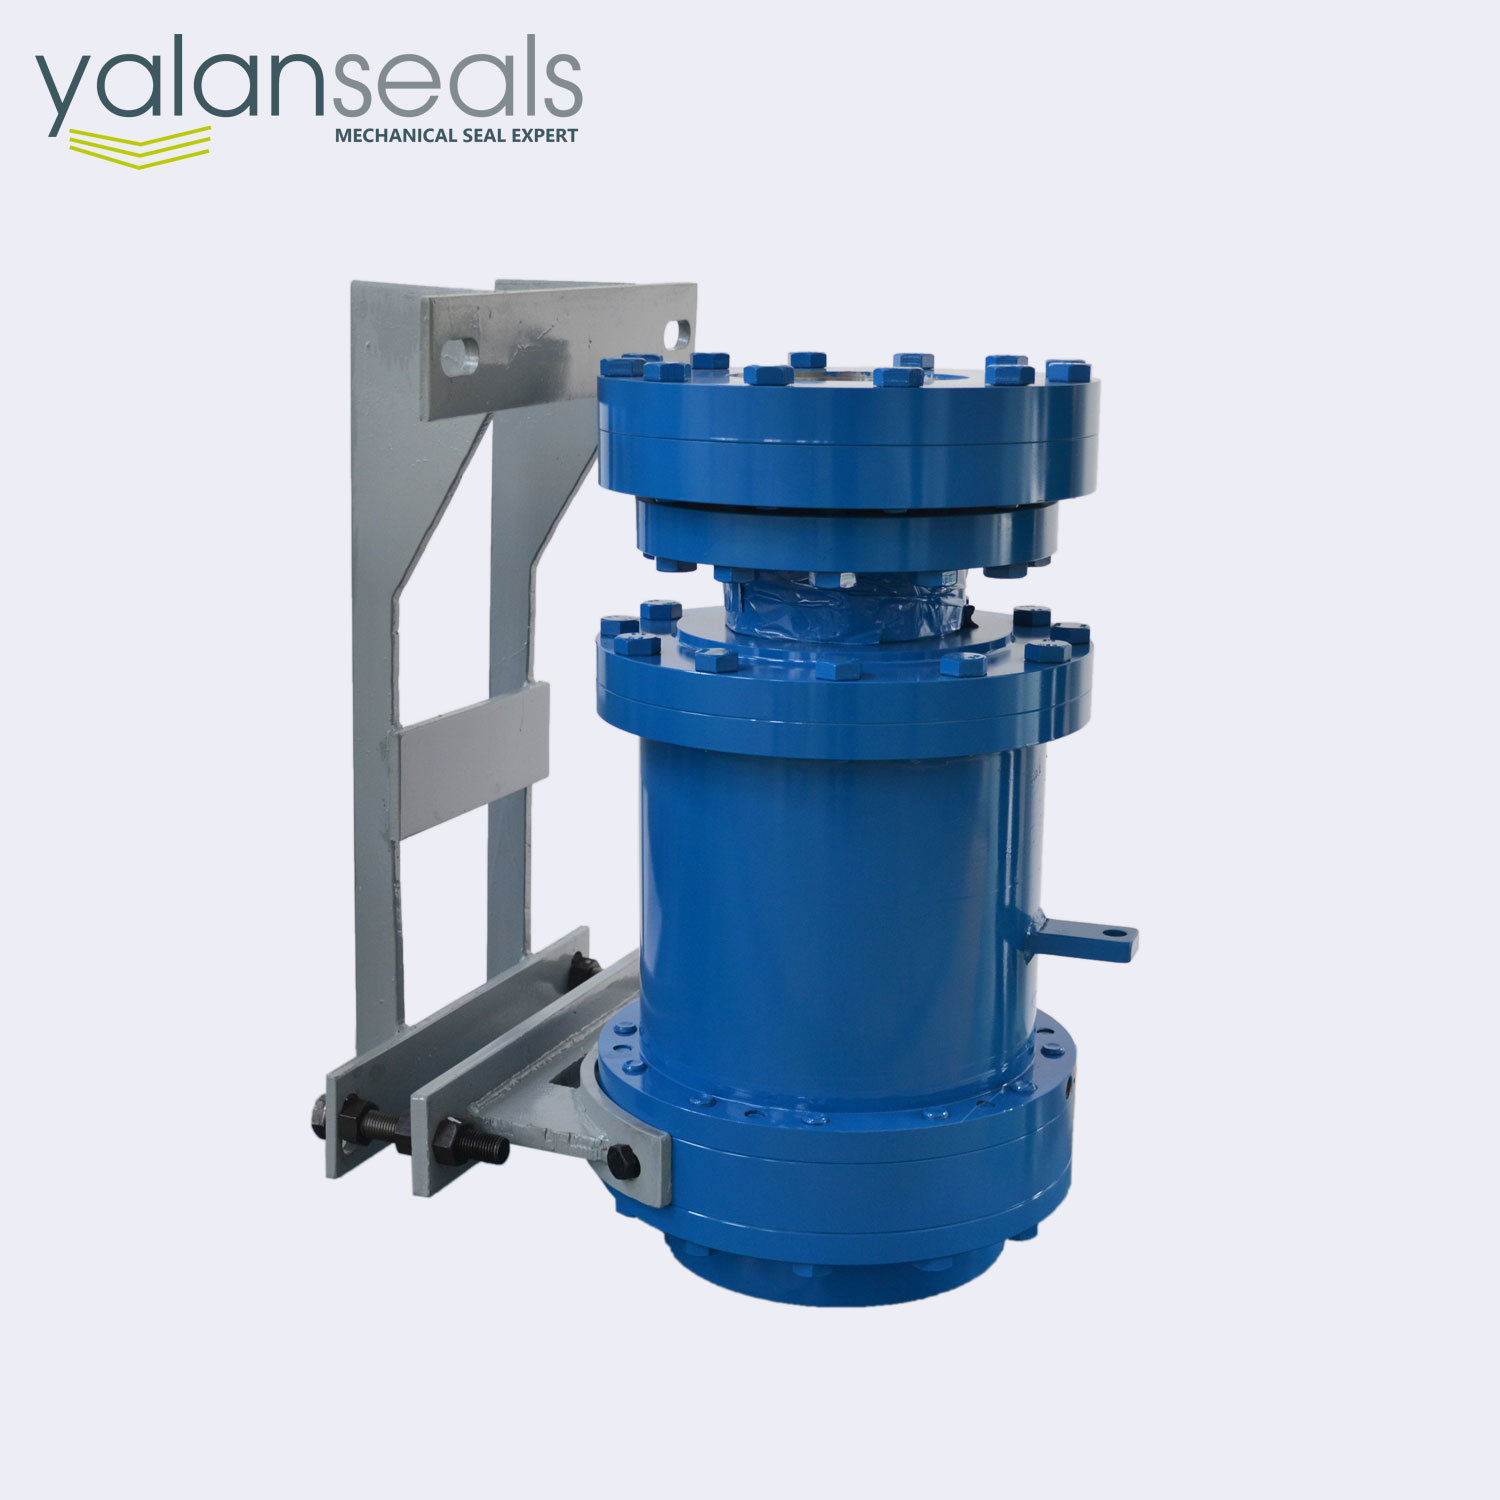 YALAN Customized Design Cartridge Mechanical Seal System for Heavy Duty Top Driven Mixers